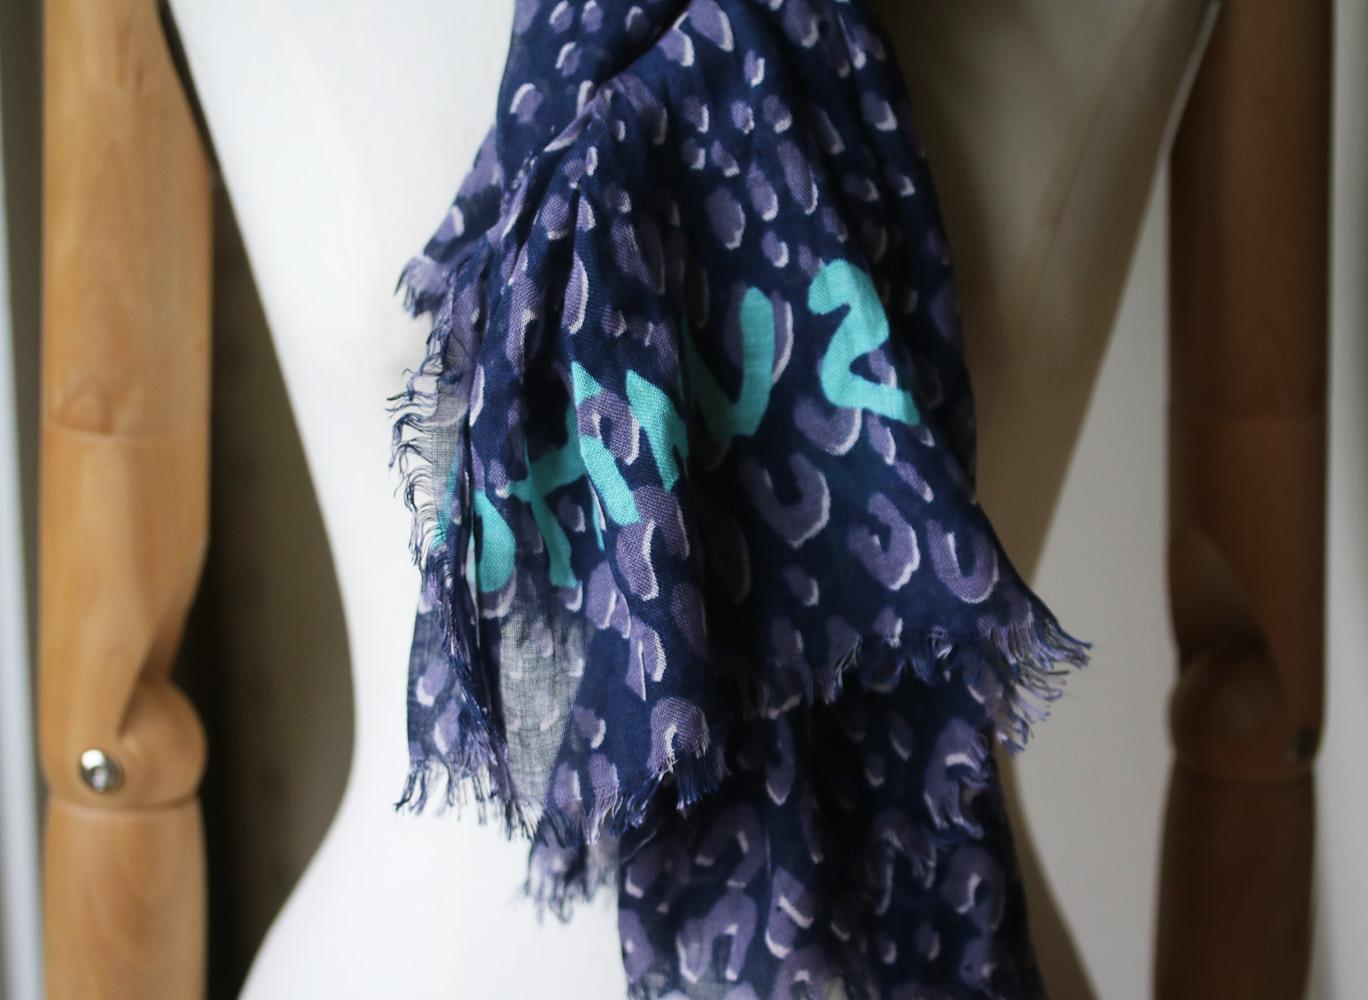 This effortlessly elegant cashmere and silk stole literally envelops you in a blanket of delicate softness. The iconic leopard pattern by Stephen Sprouse has been revitalized with hints of pop colours that to liven things up. Louis Vuitton graffiti